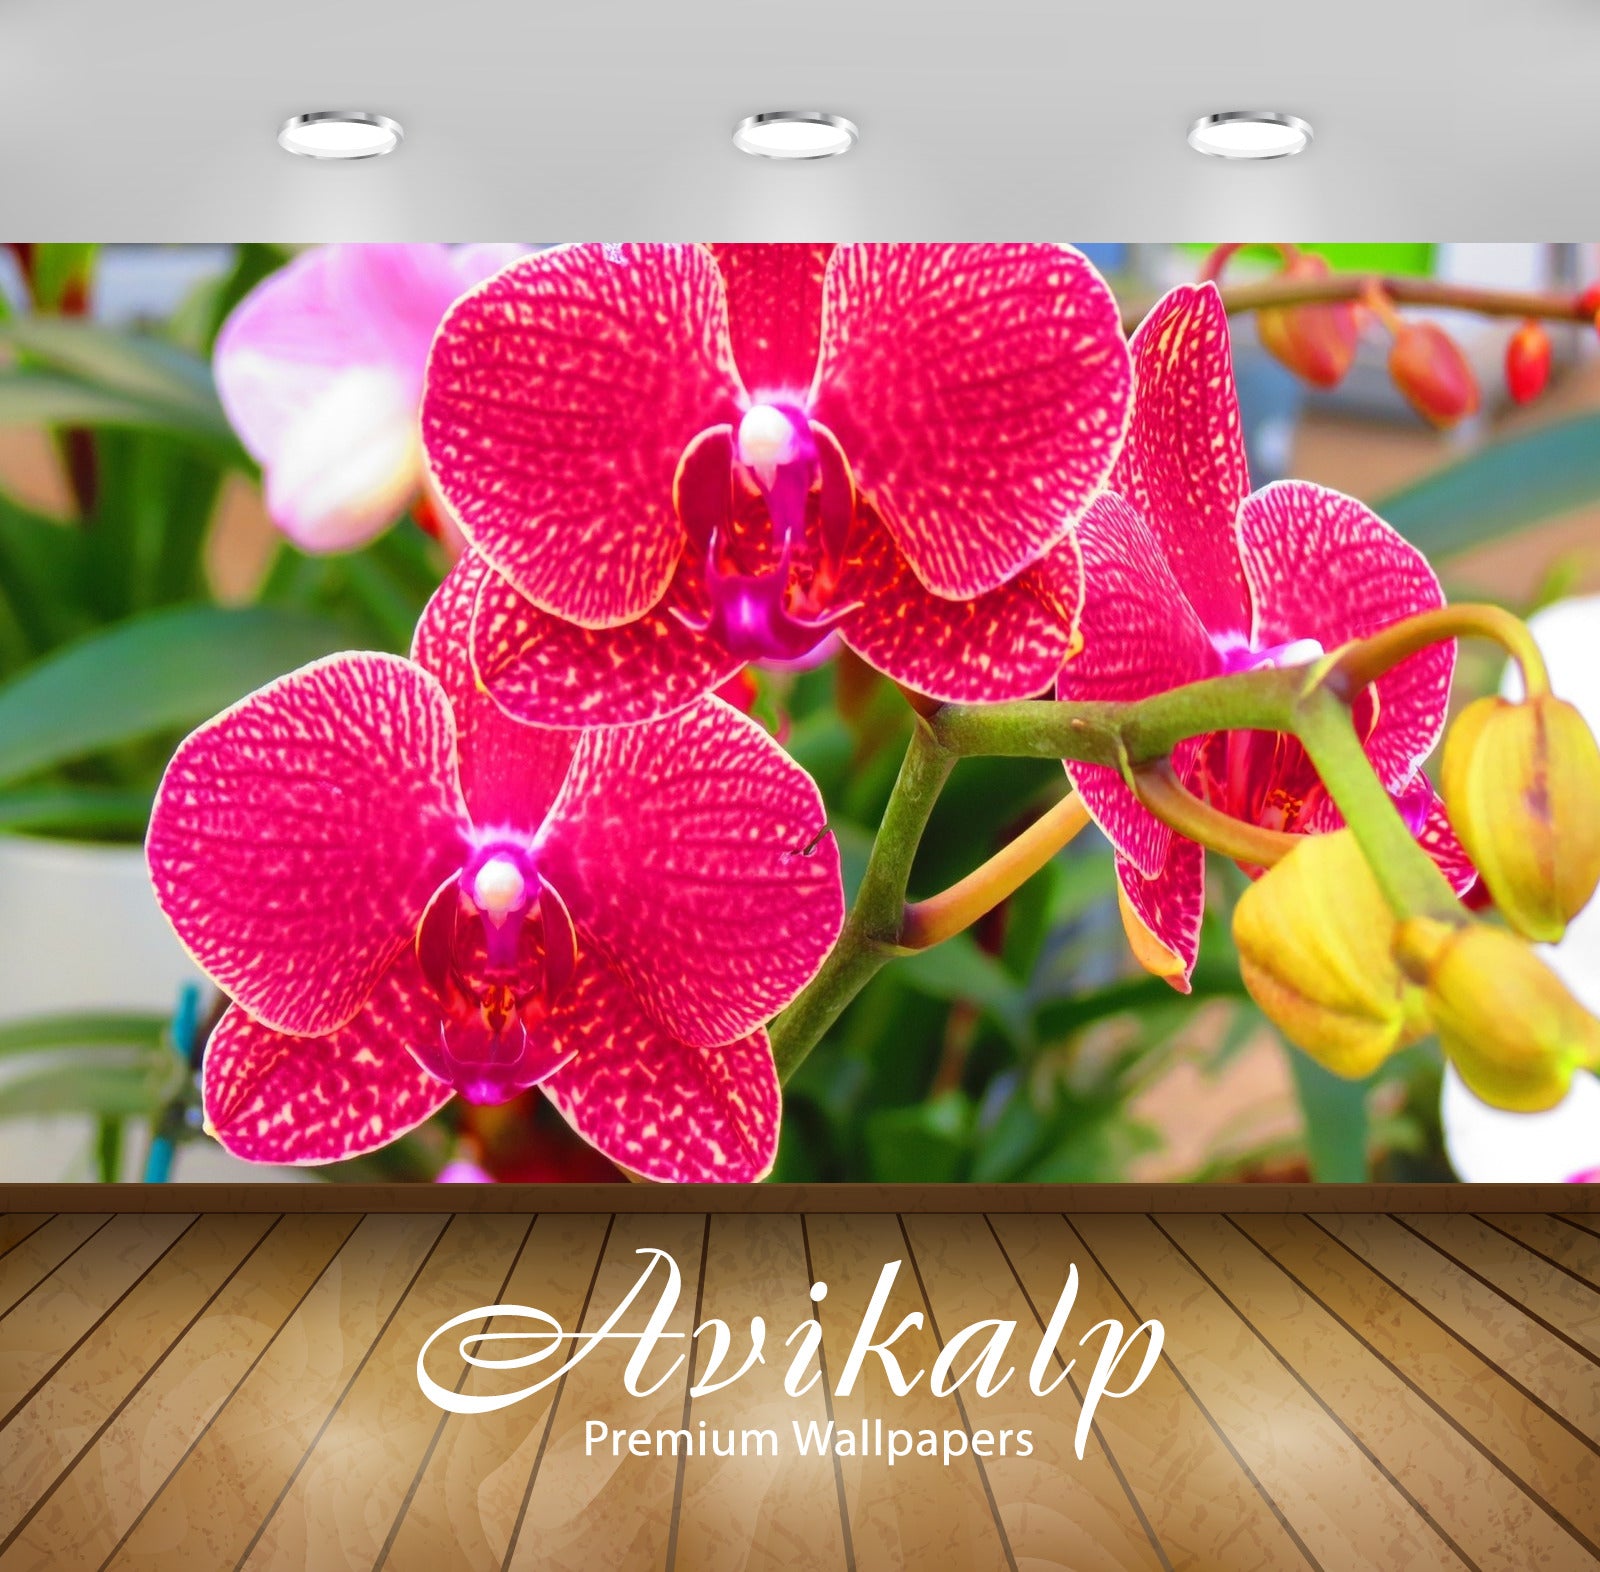 Avikalp Exclusive Awi2707 Flower Pink Orchid Full HD Wallpapers for Living room, Hall, Kids Room, Ki